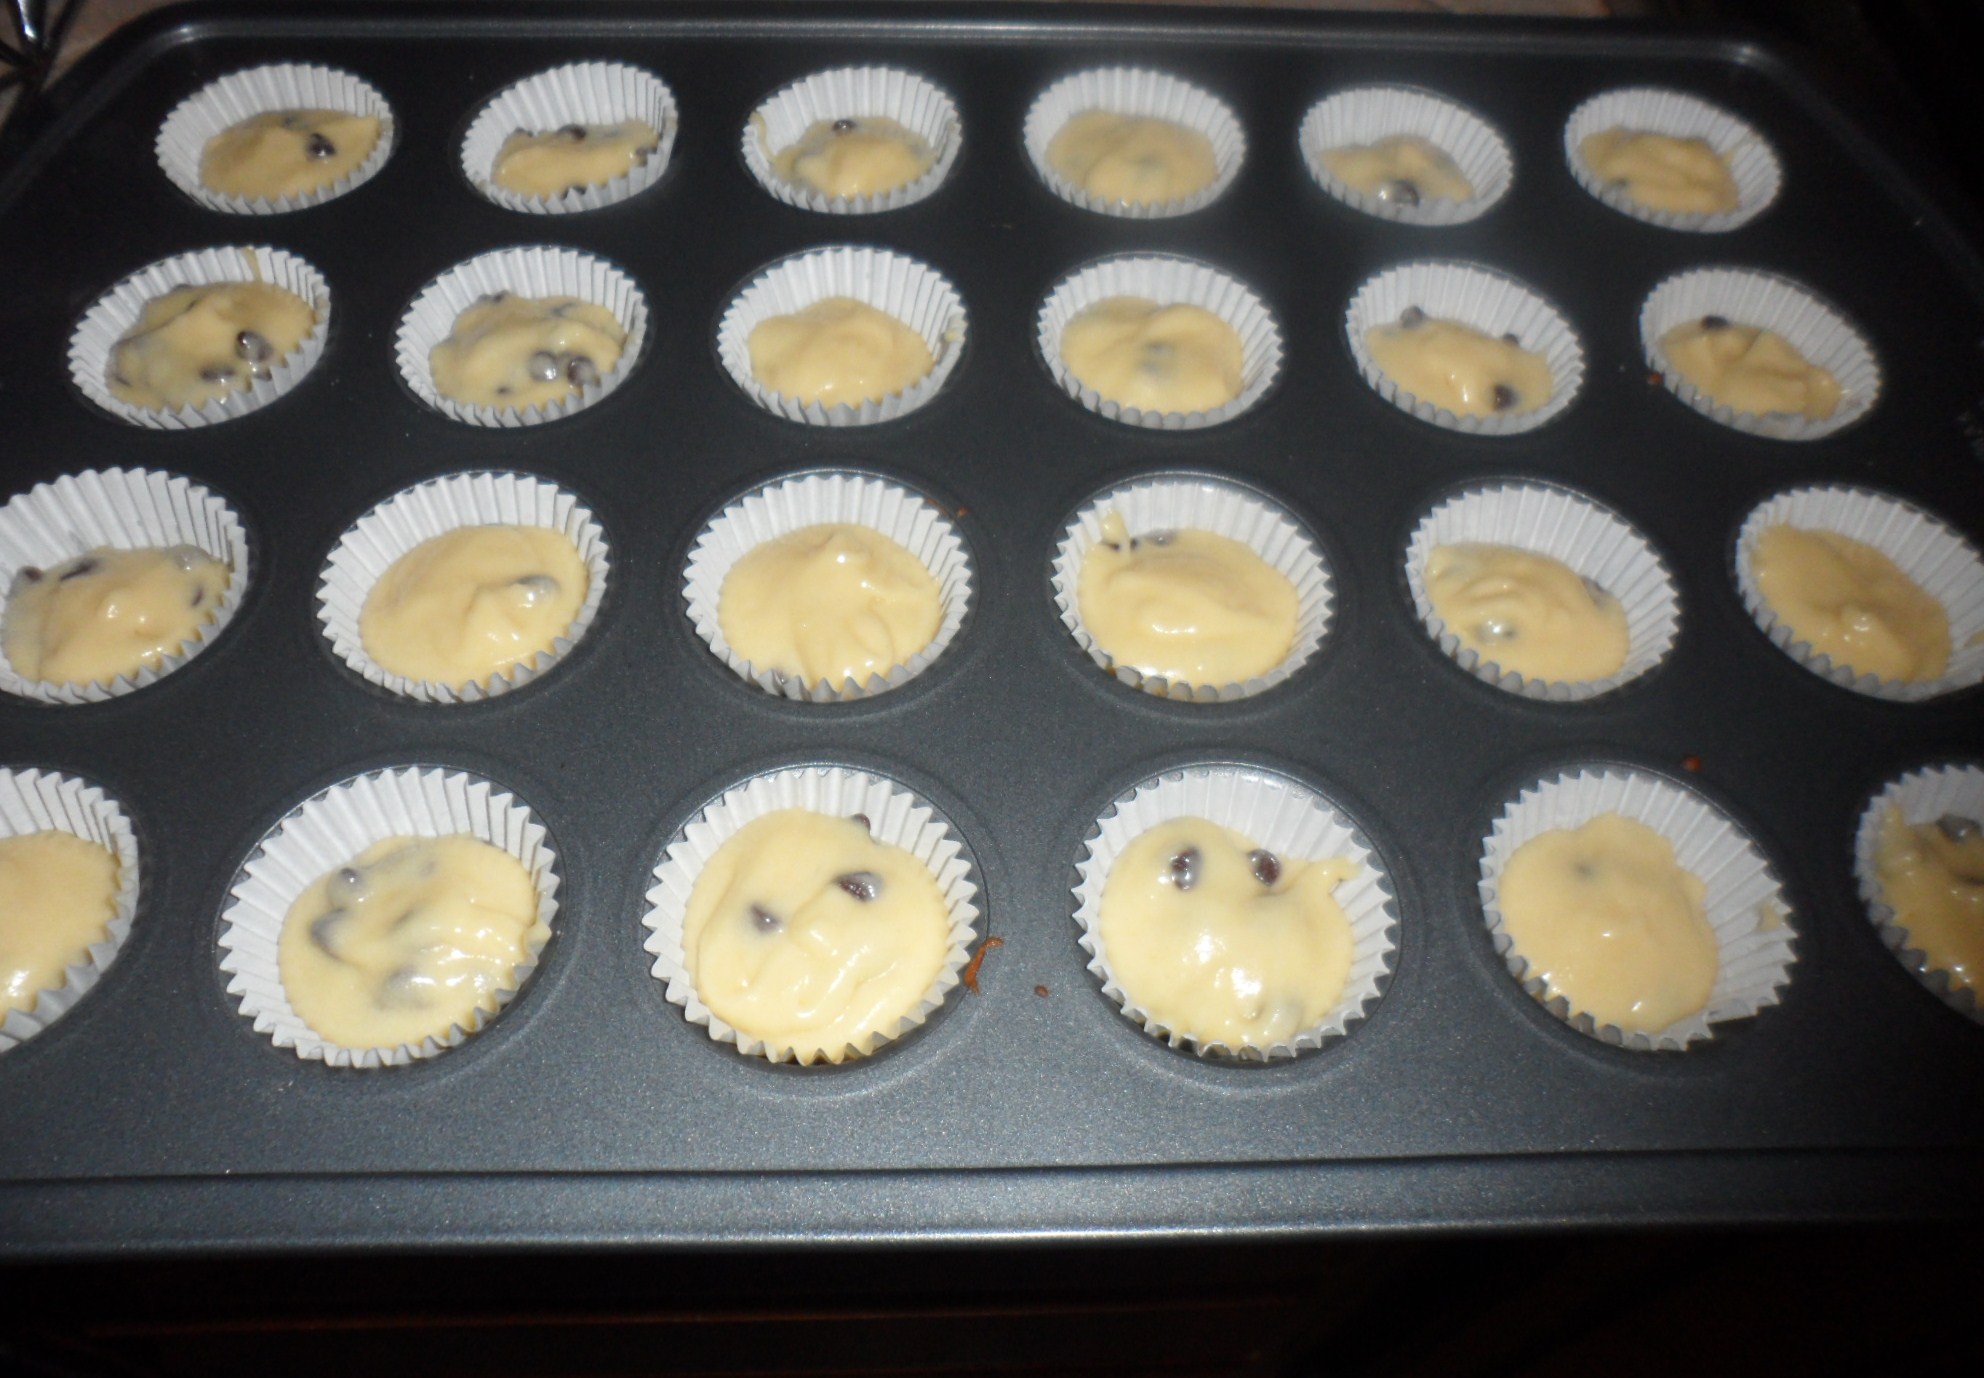 Here is the filled pan.  I had the boys put the cupcake liners in while I was beating the butter and sugar together.